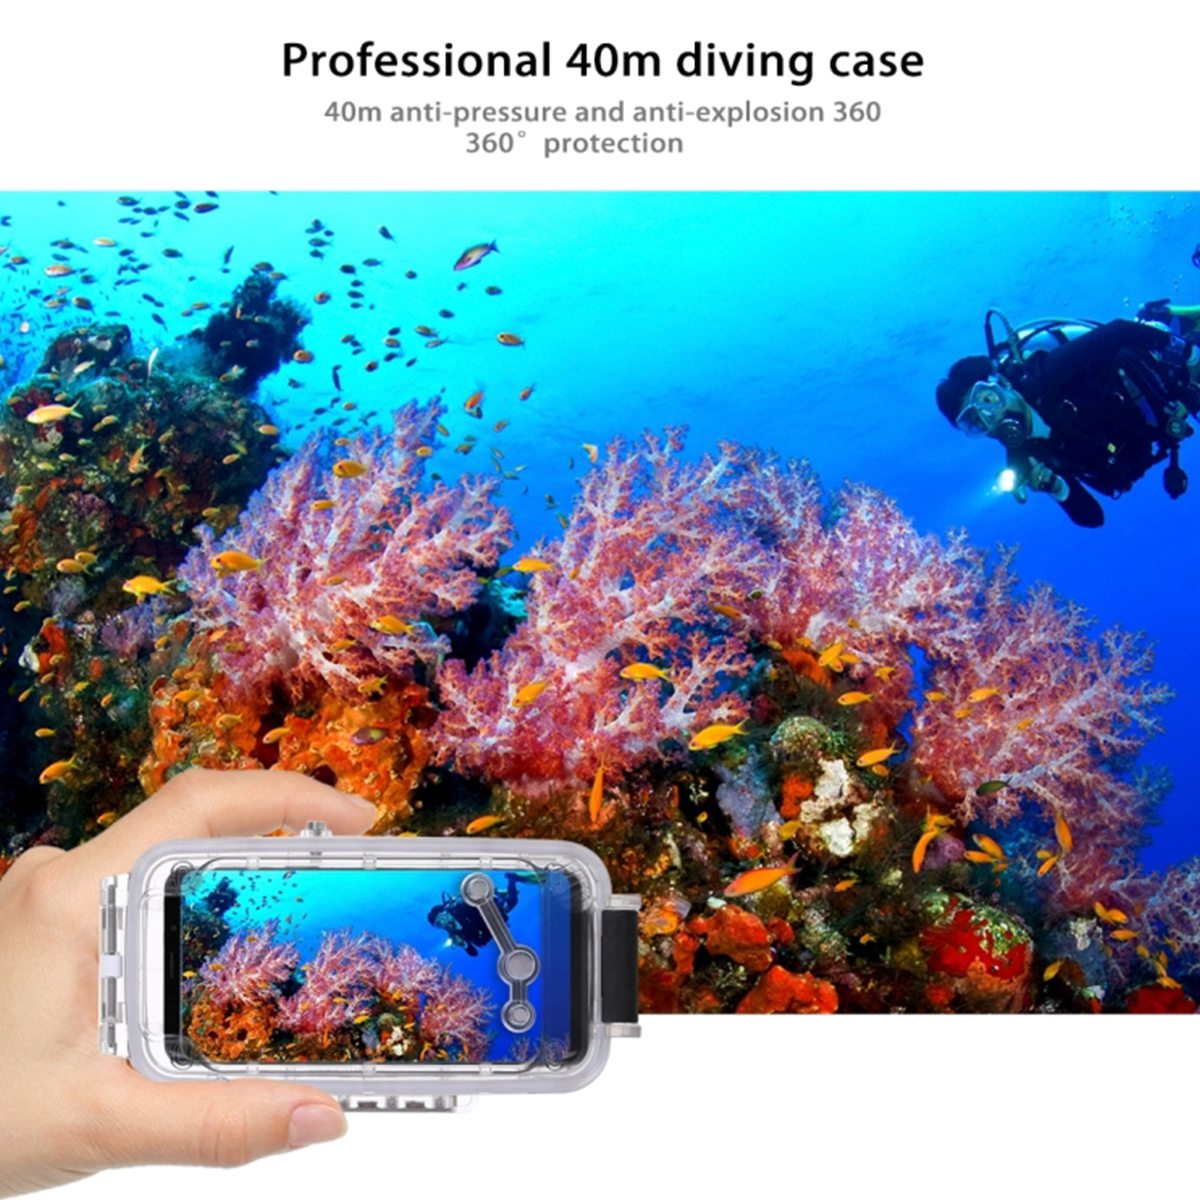 40m-Diving-Anti-pressure-Anti-explosion-Shockproof-Waterproof-Case-For-Samsung-Galaxy-S9Galaxy-S9-Pl-1474120-2